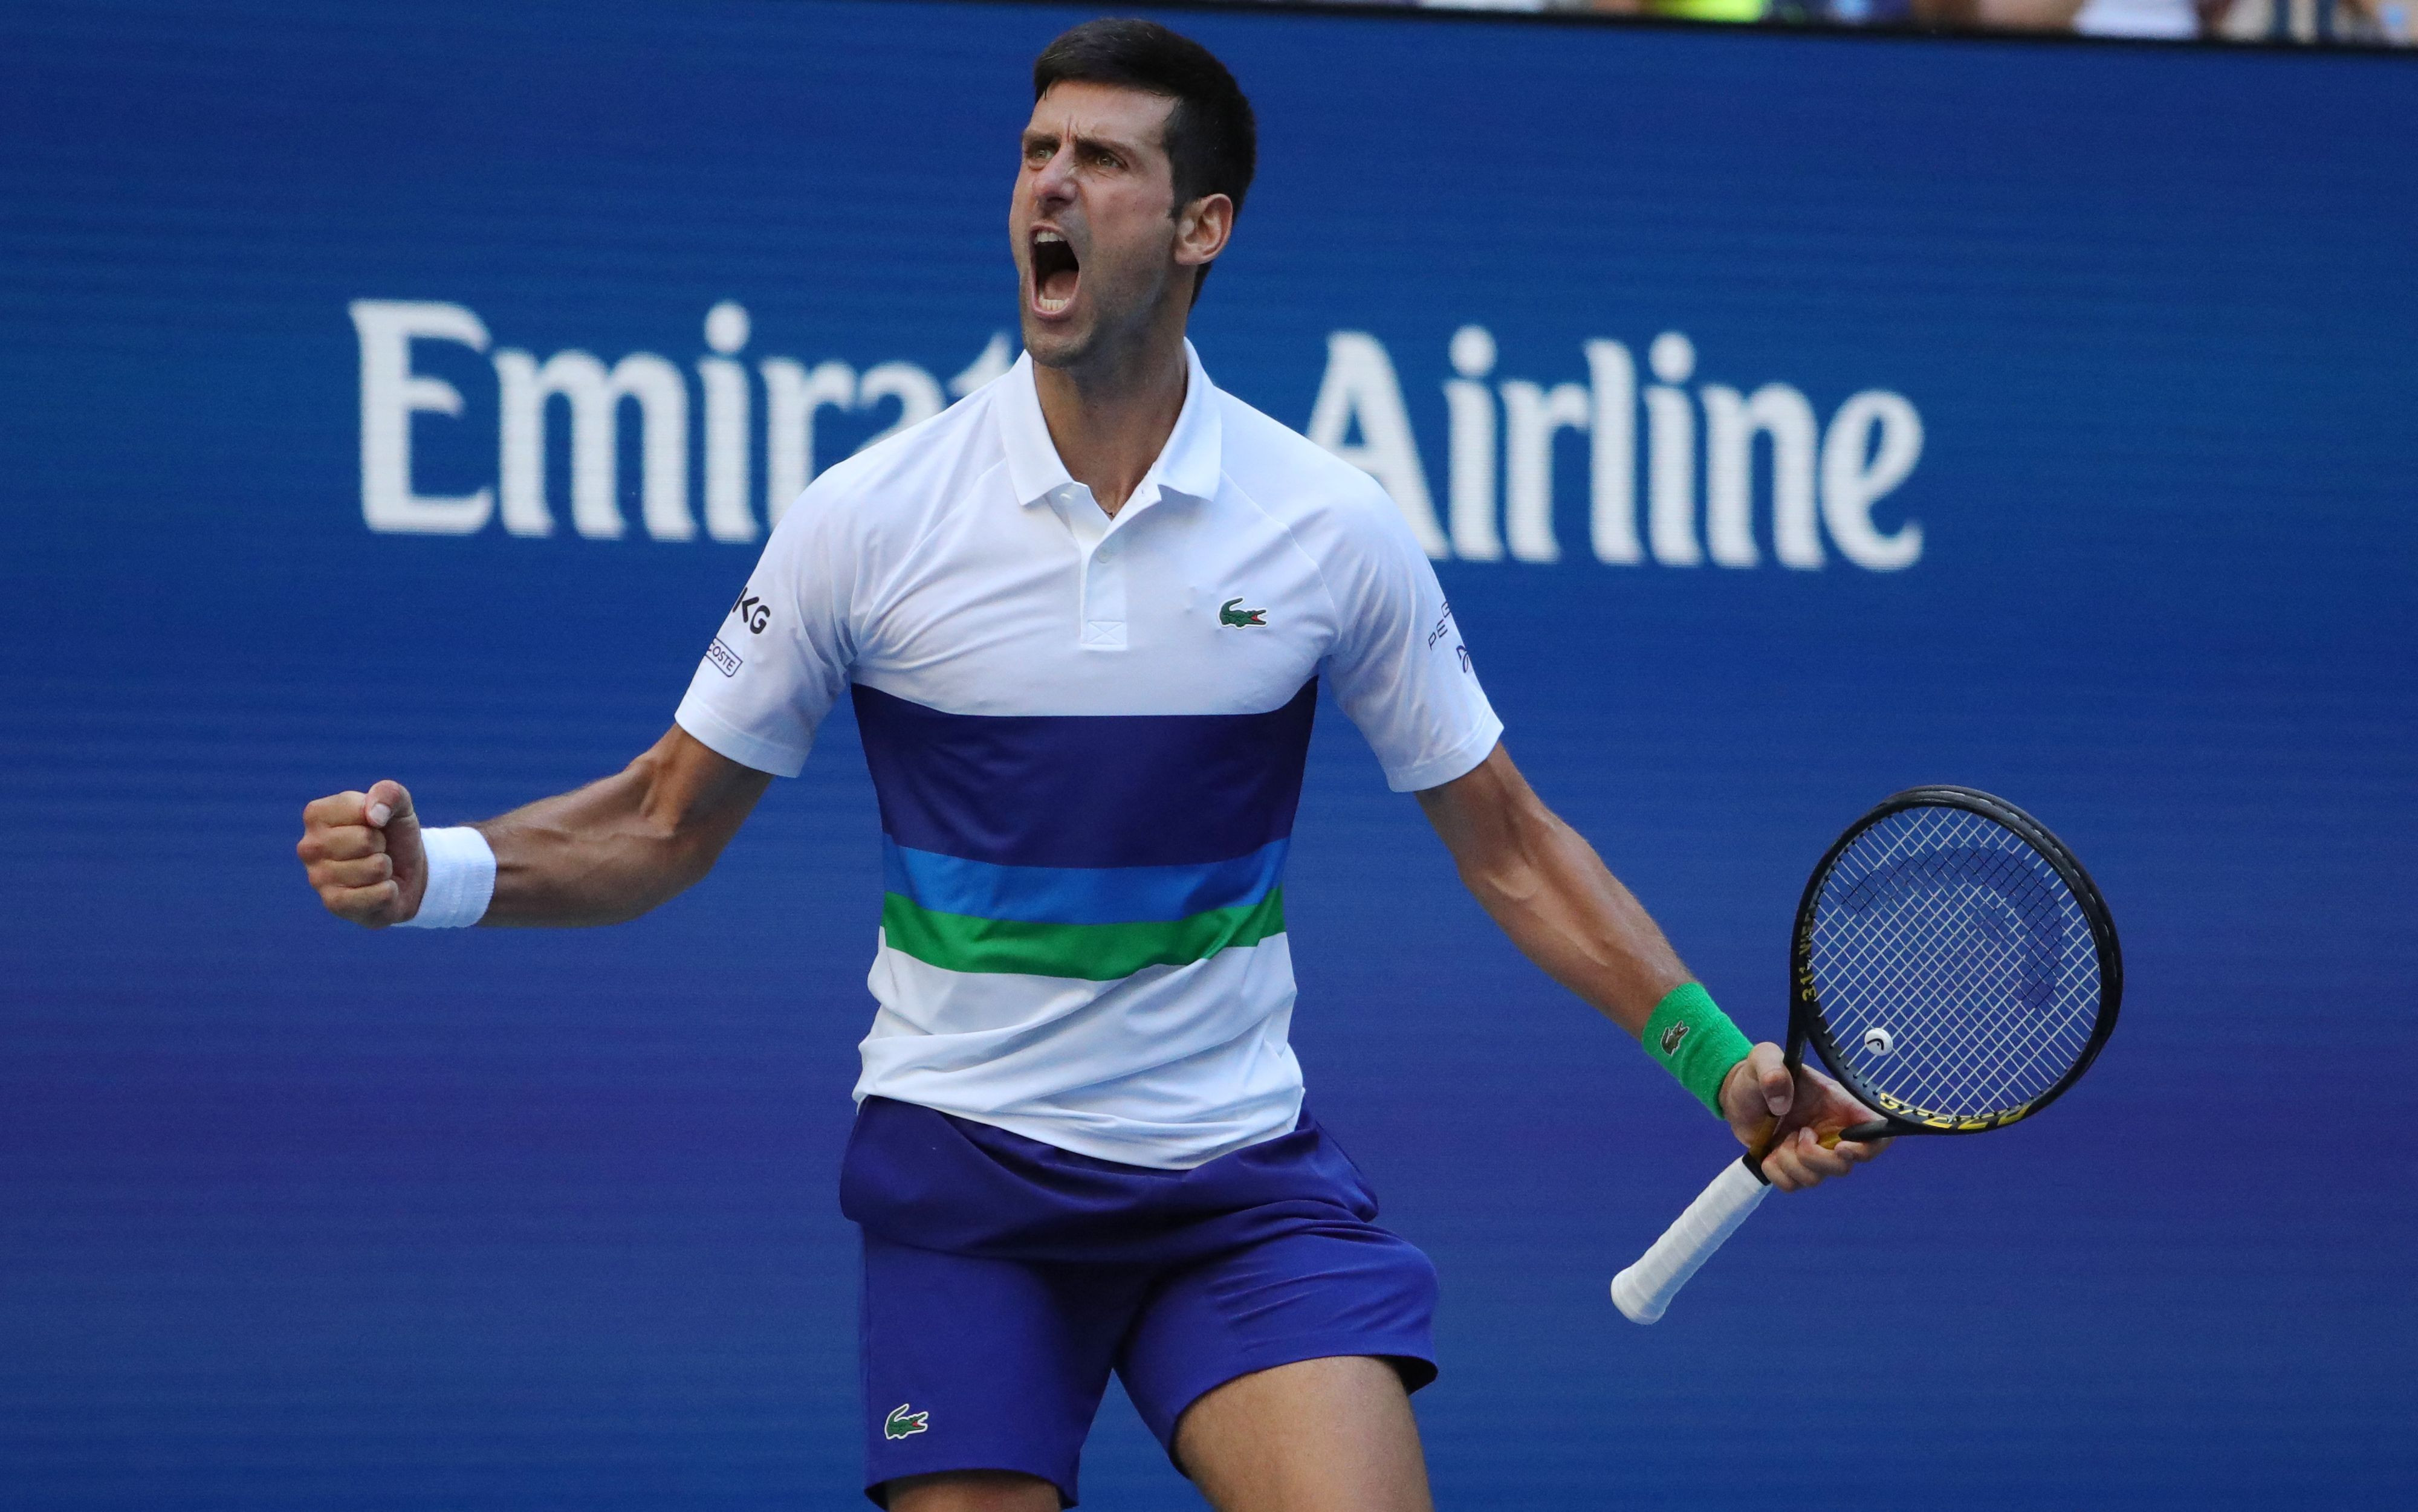 Novak Djokovic’s passionate response when asked about his tennis legacy